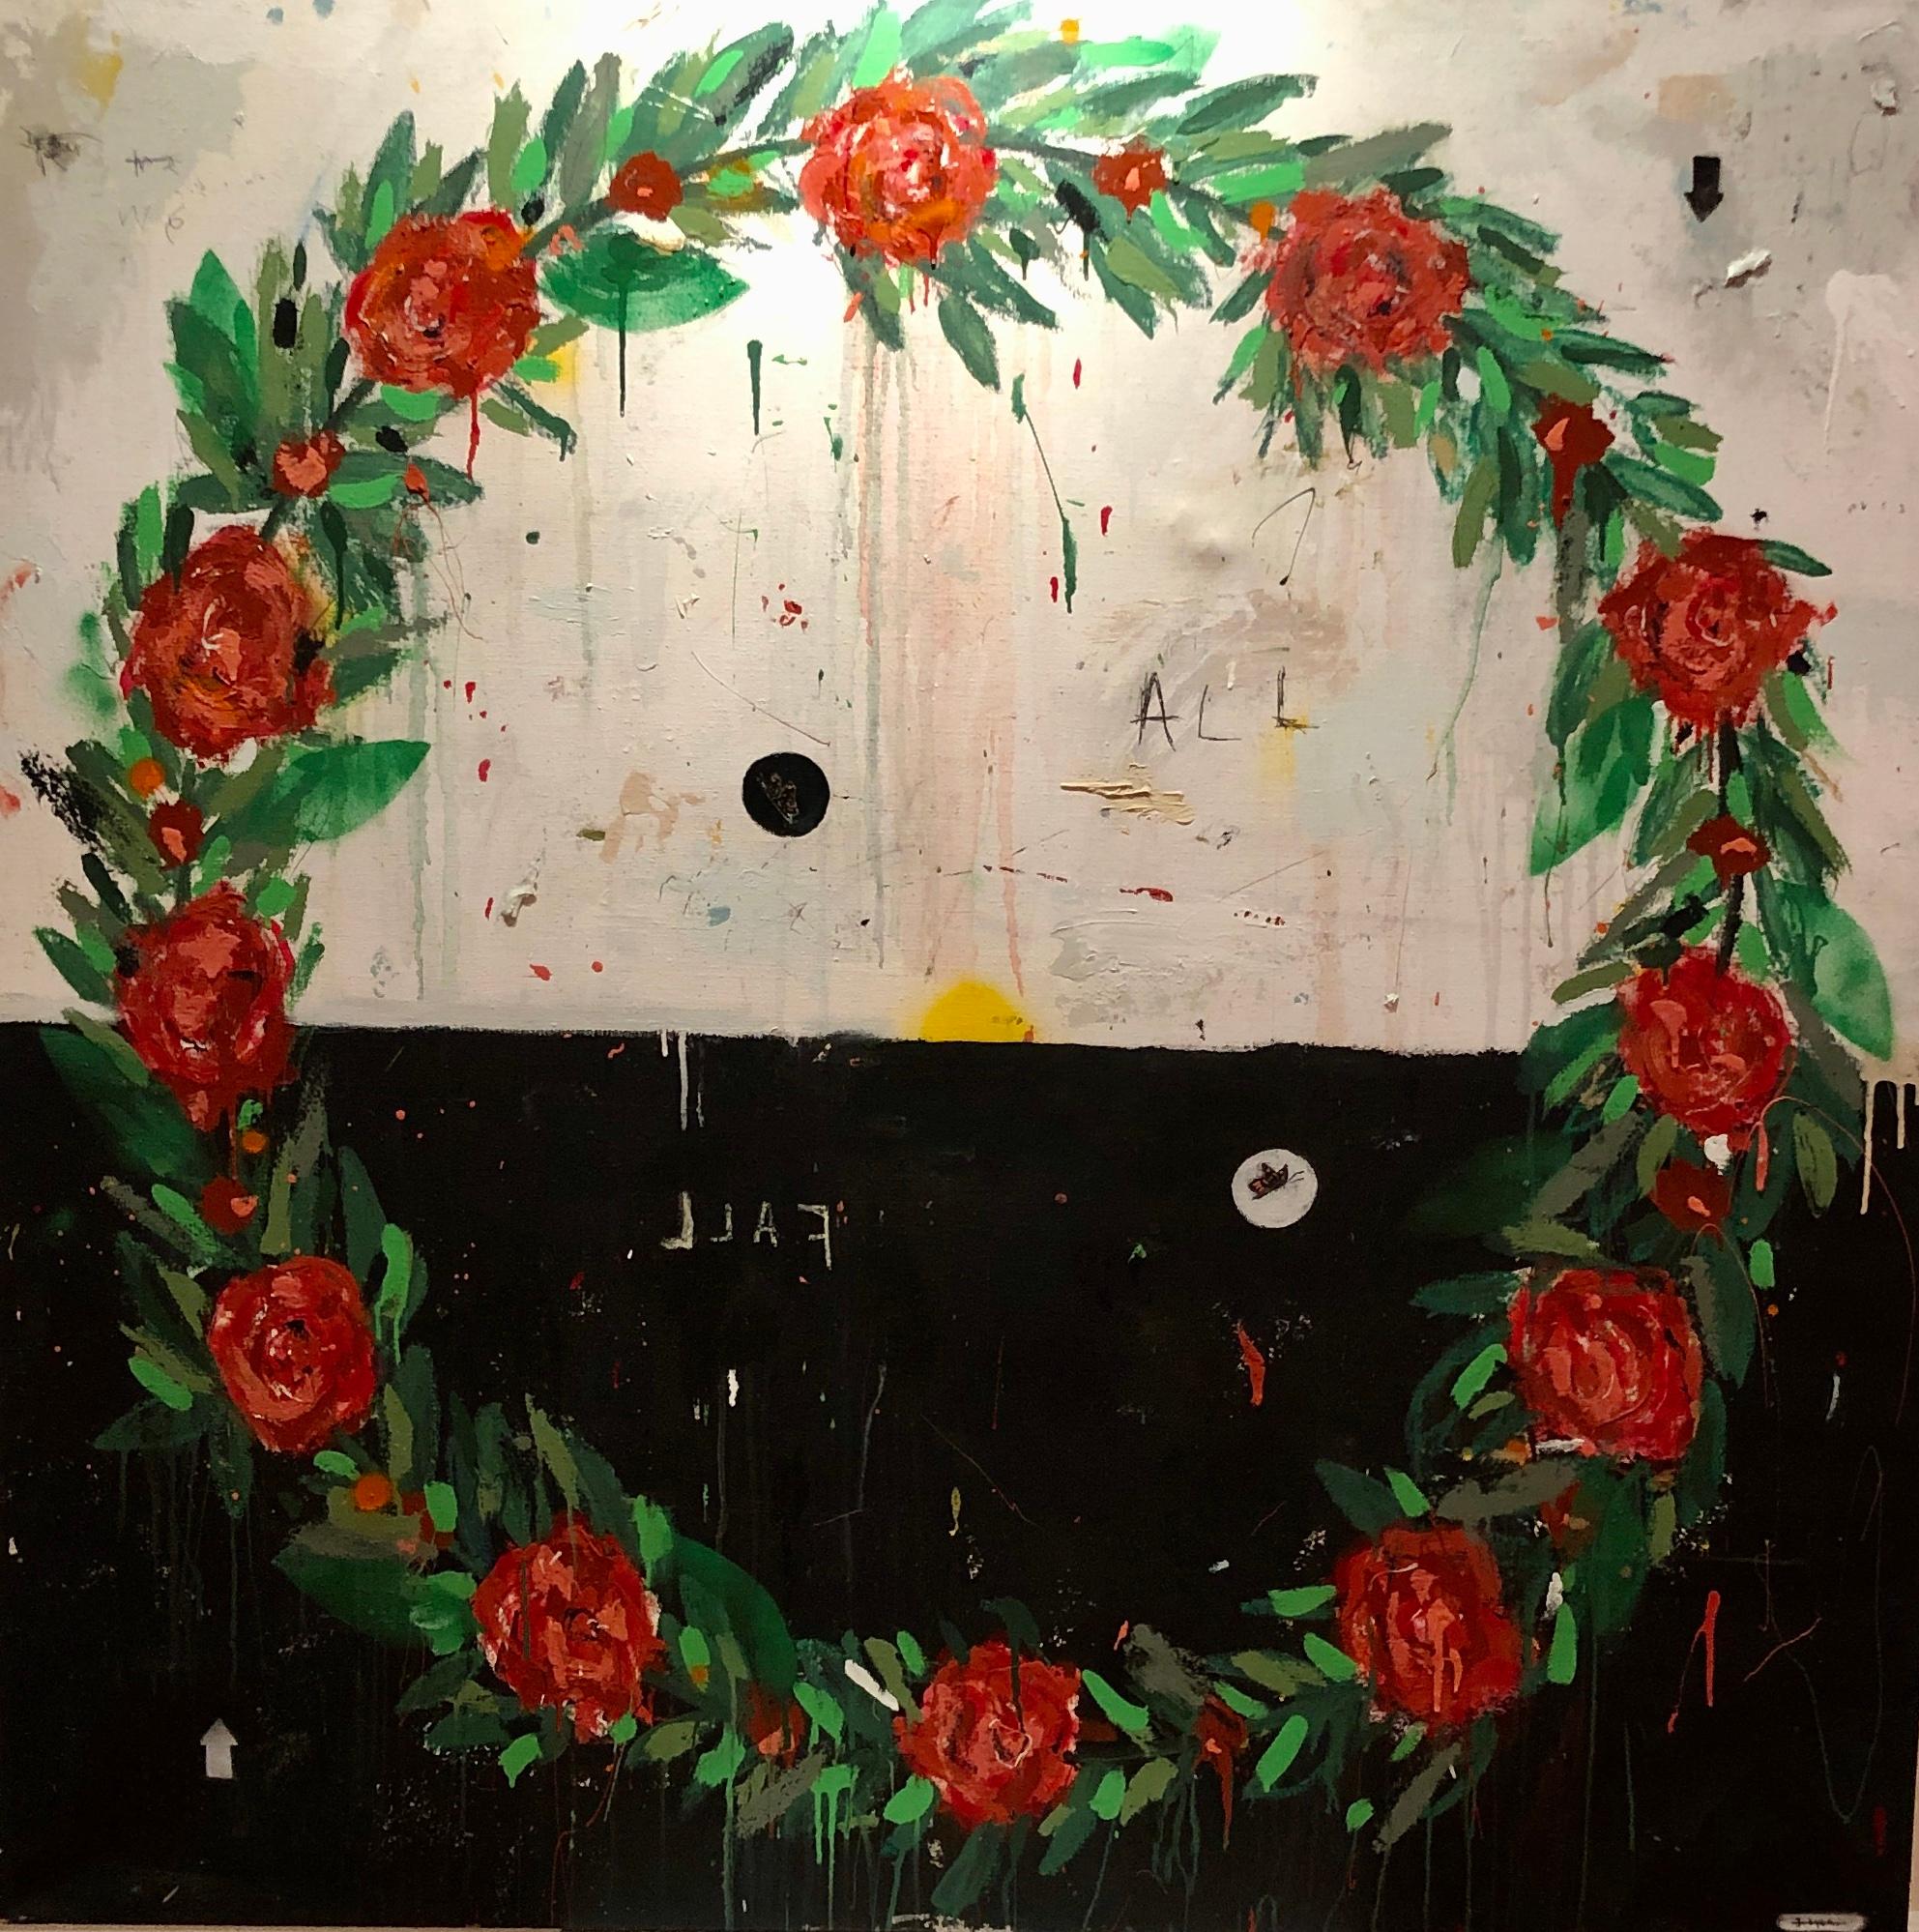 Large scale contemporary painting of a wreath of roses with the words "We All Fall" incorporated. Lyons’s mediums include wood, acrylic, house paint, spray paint, oil stick, epoxy resin and pencil. His inspirations are most often triggered by a